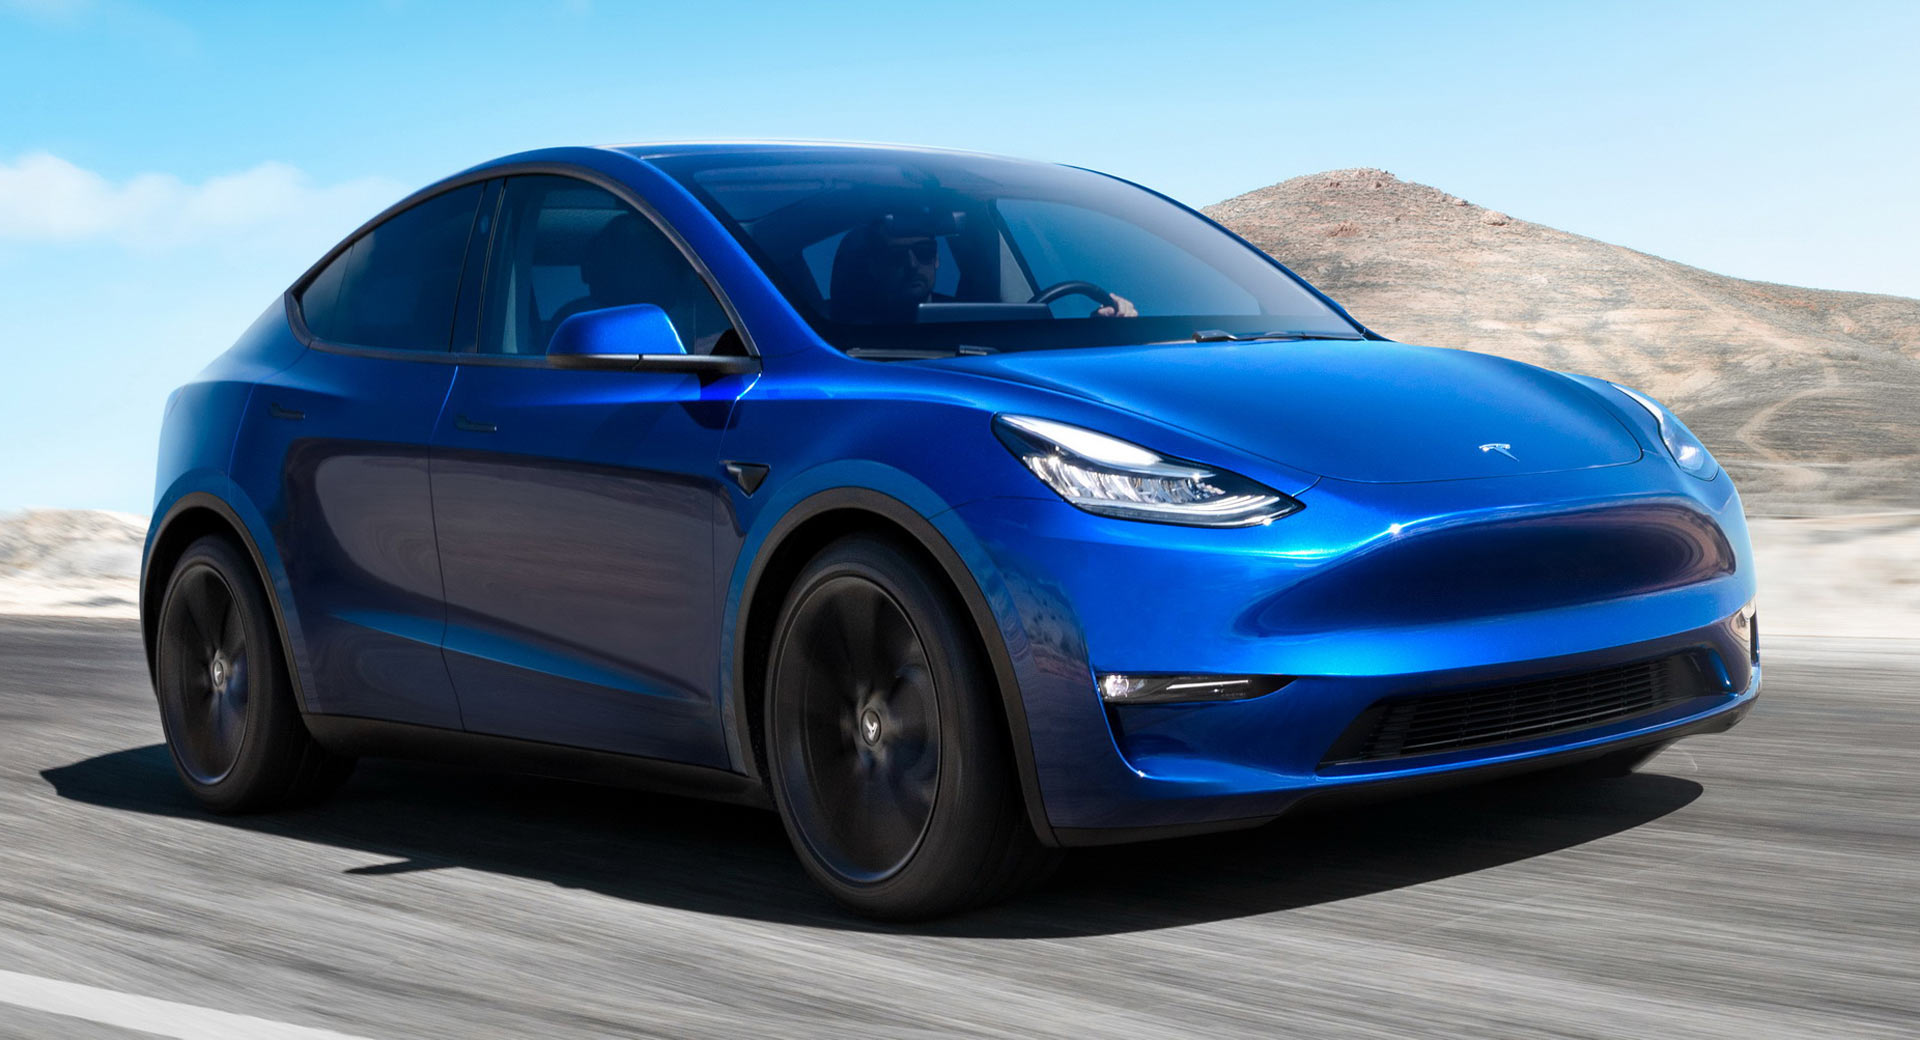 Range Of Tesla Model Y Performance Rated At 315 Miles By EPA Carscoops